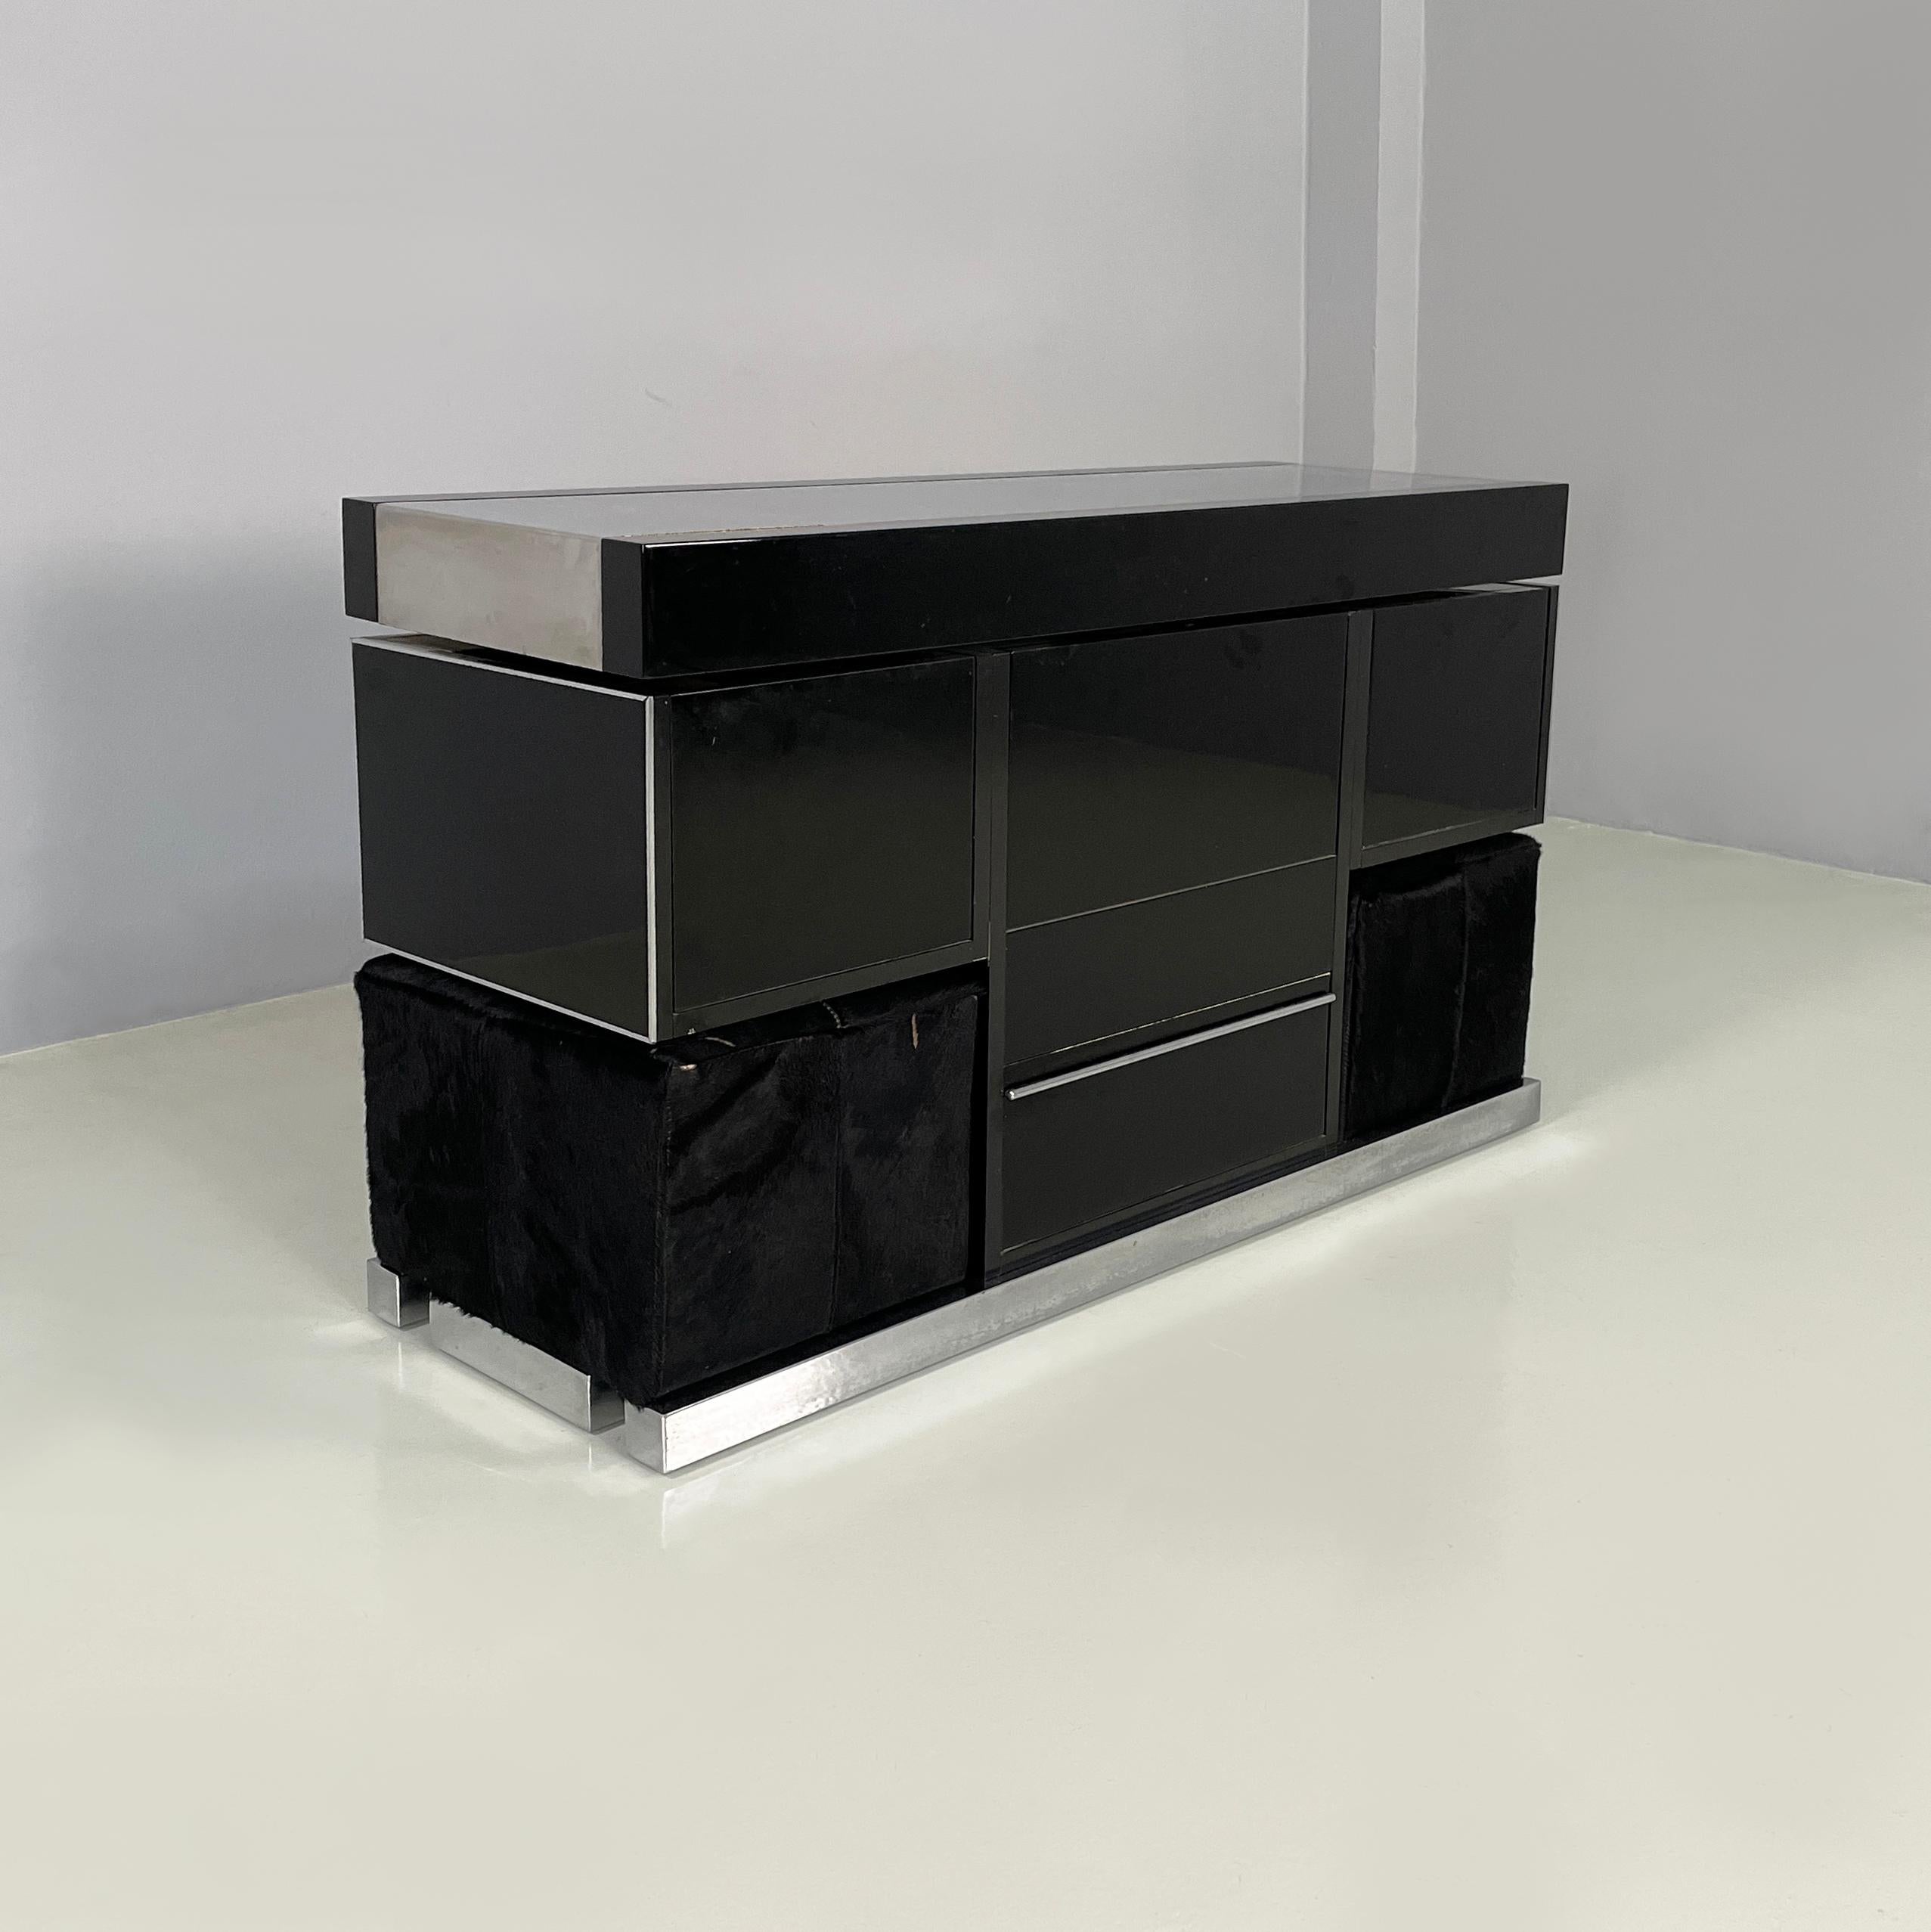 Modern Italian modern Black wood metal bar cabinet by Willy Rizzo for Mario Sabot 1970s For Sale